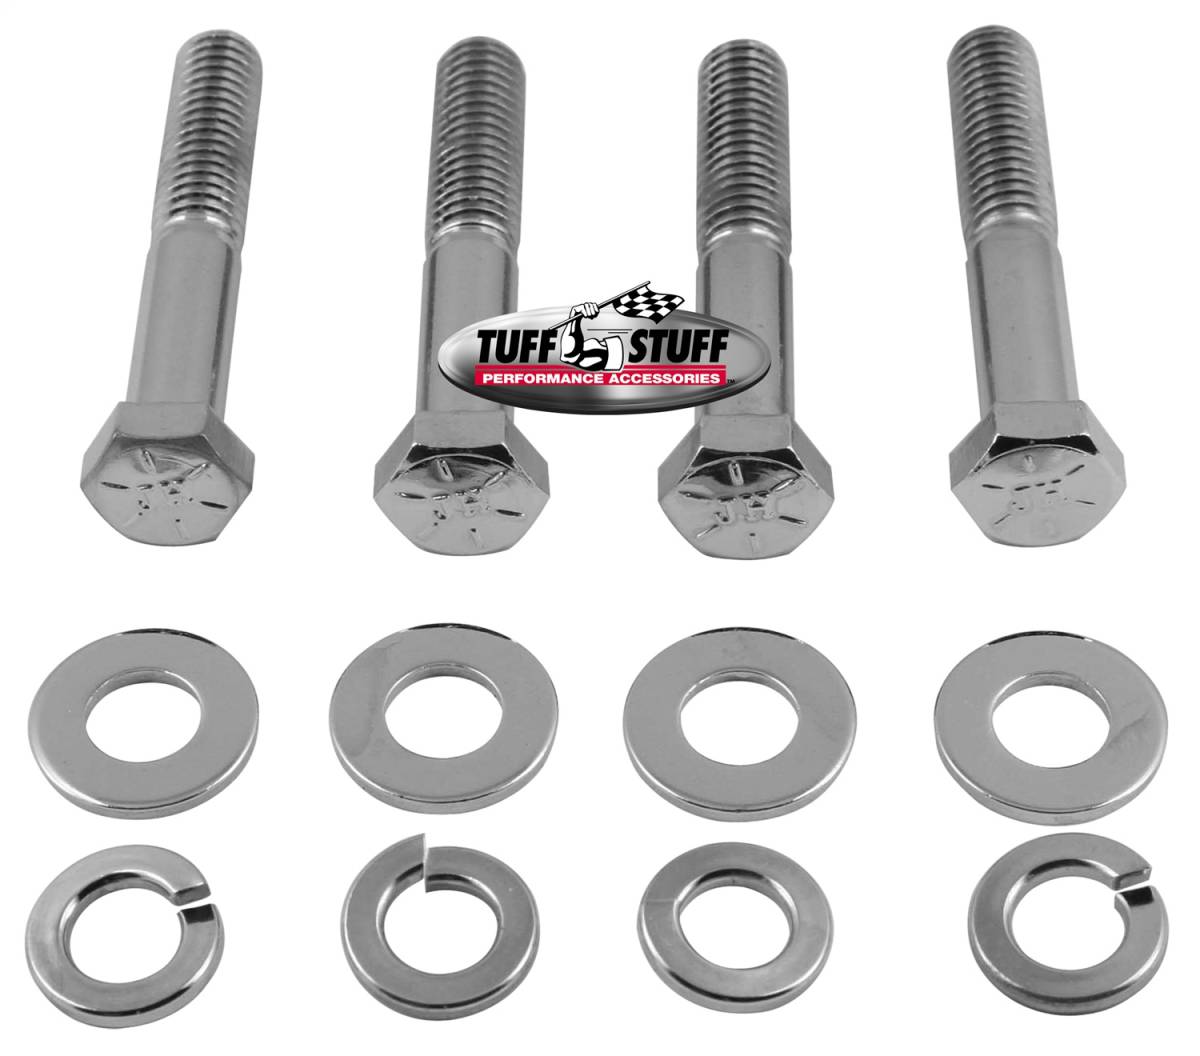 Tuff Stuff Performance - Water Pump Bolt Kit Chrome Hex Incl. (4) 3/4 in.-16x2 1/4 in. Bolts/(4) Lock And (4) Flat Washers Fits Chevy Small/Big Block w/Long Water Pump PN[1449/1461/1511] 7678A